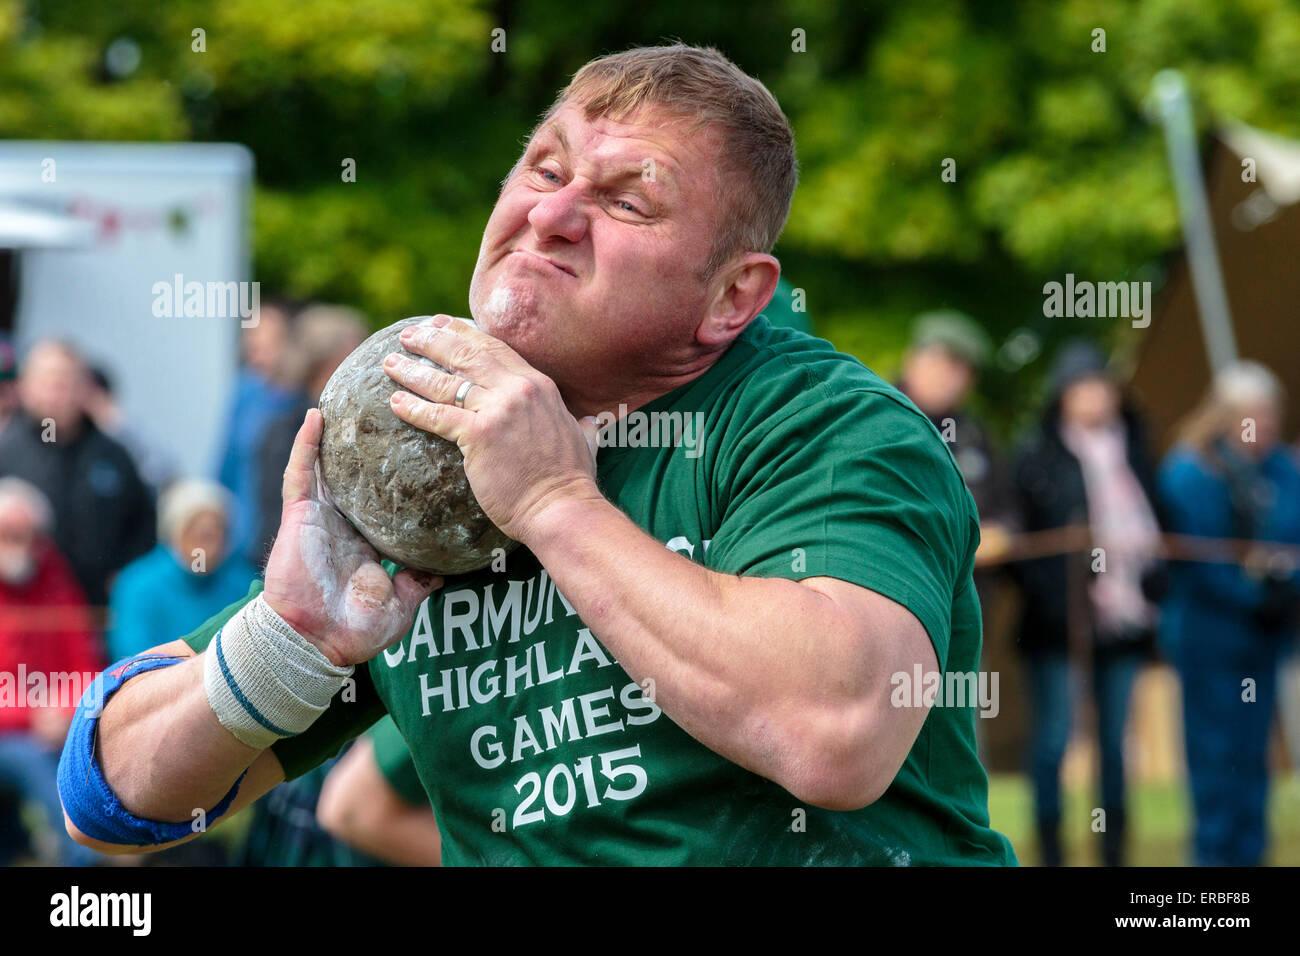 Glasgow, Scotland, UK. 31st May, 2015. Neil Elliott from Shettleston Glasgow, a competitor, taking part in the 'Stone Putt' competition of Carmunnock Highland Games. This is a traditional competition of Scottish Highland Games where a stone weighing from 16 lbs to 26 lbs is thrown as far as possible. Credit:  Findlay/Alamy Live News Stock Photo